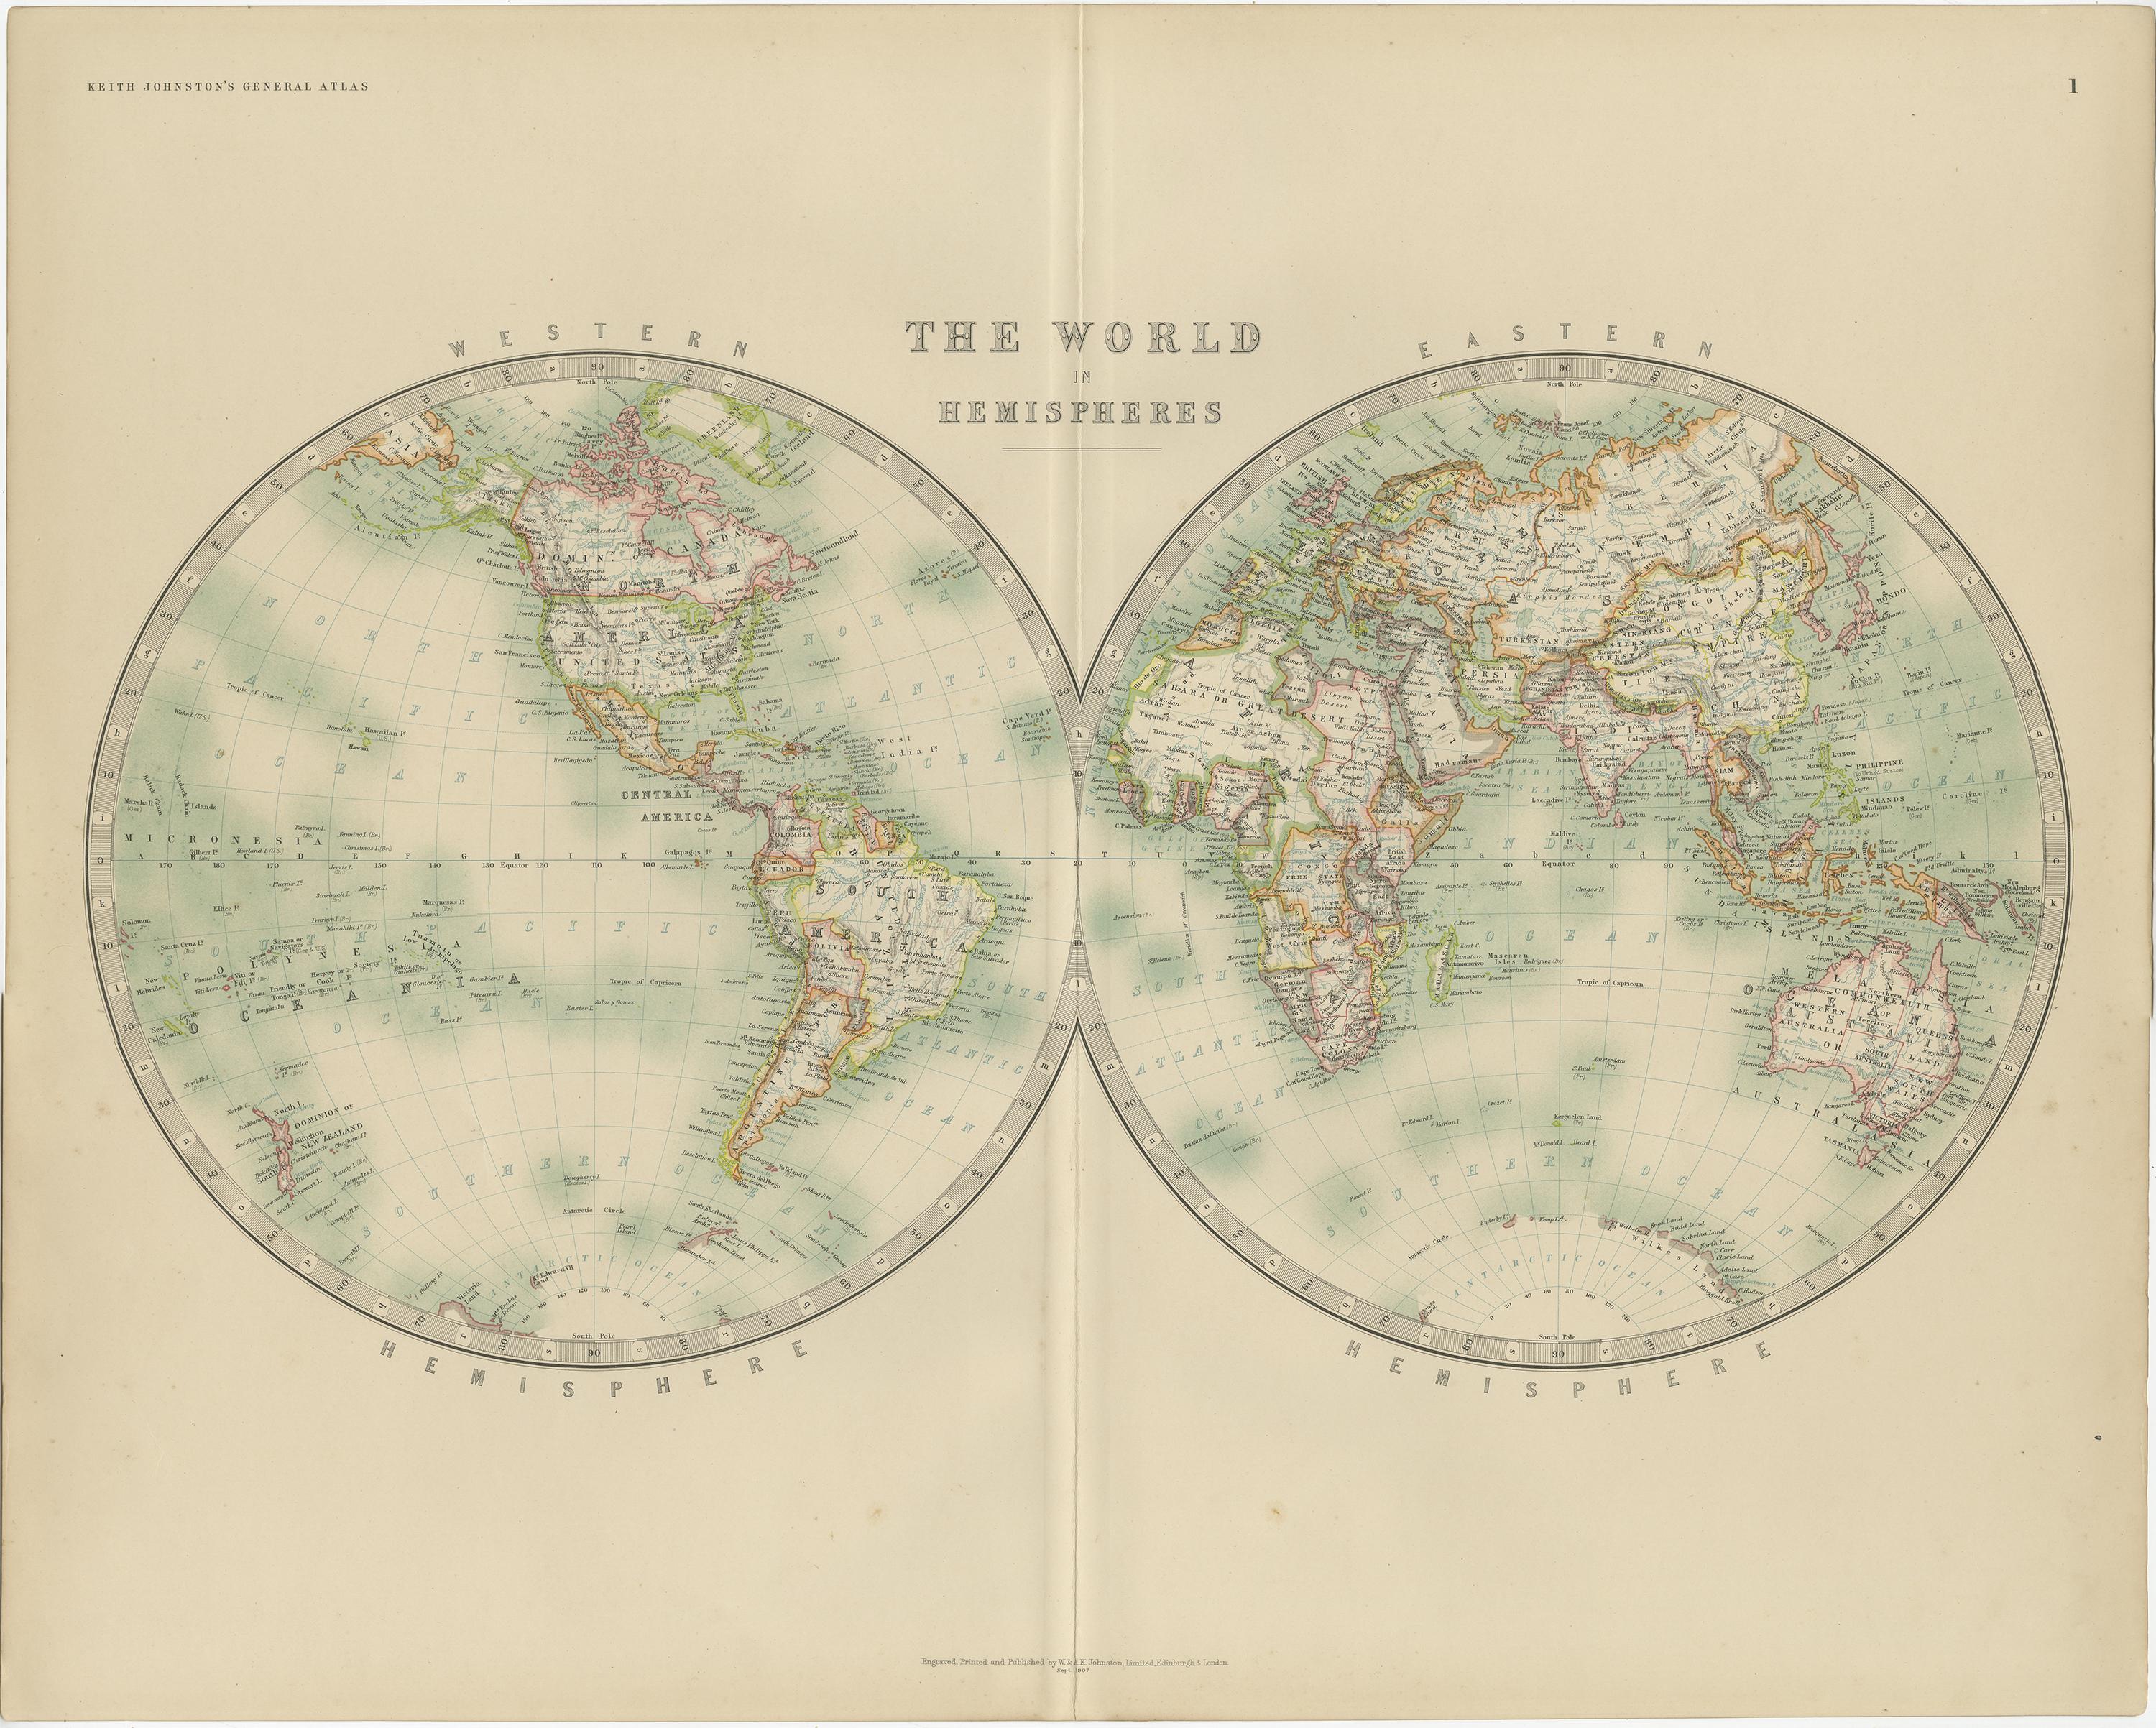 Antique map titled 'The World in Hemispheres'. Original antique world map. This map originates from the ‘Royal Atlas of Modern Geography’. Published by W. & A.K. Johnston, 1909.